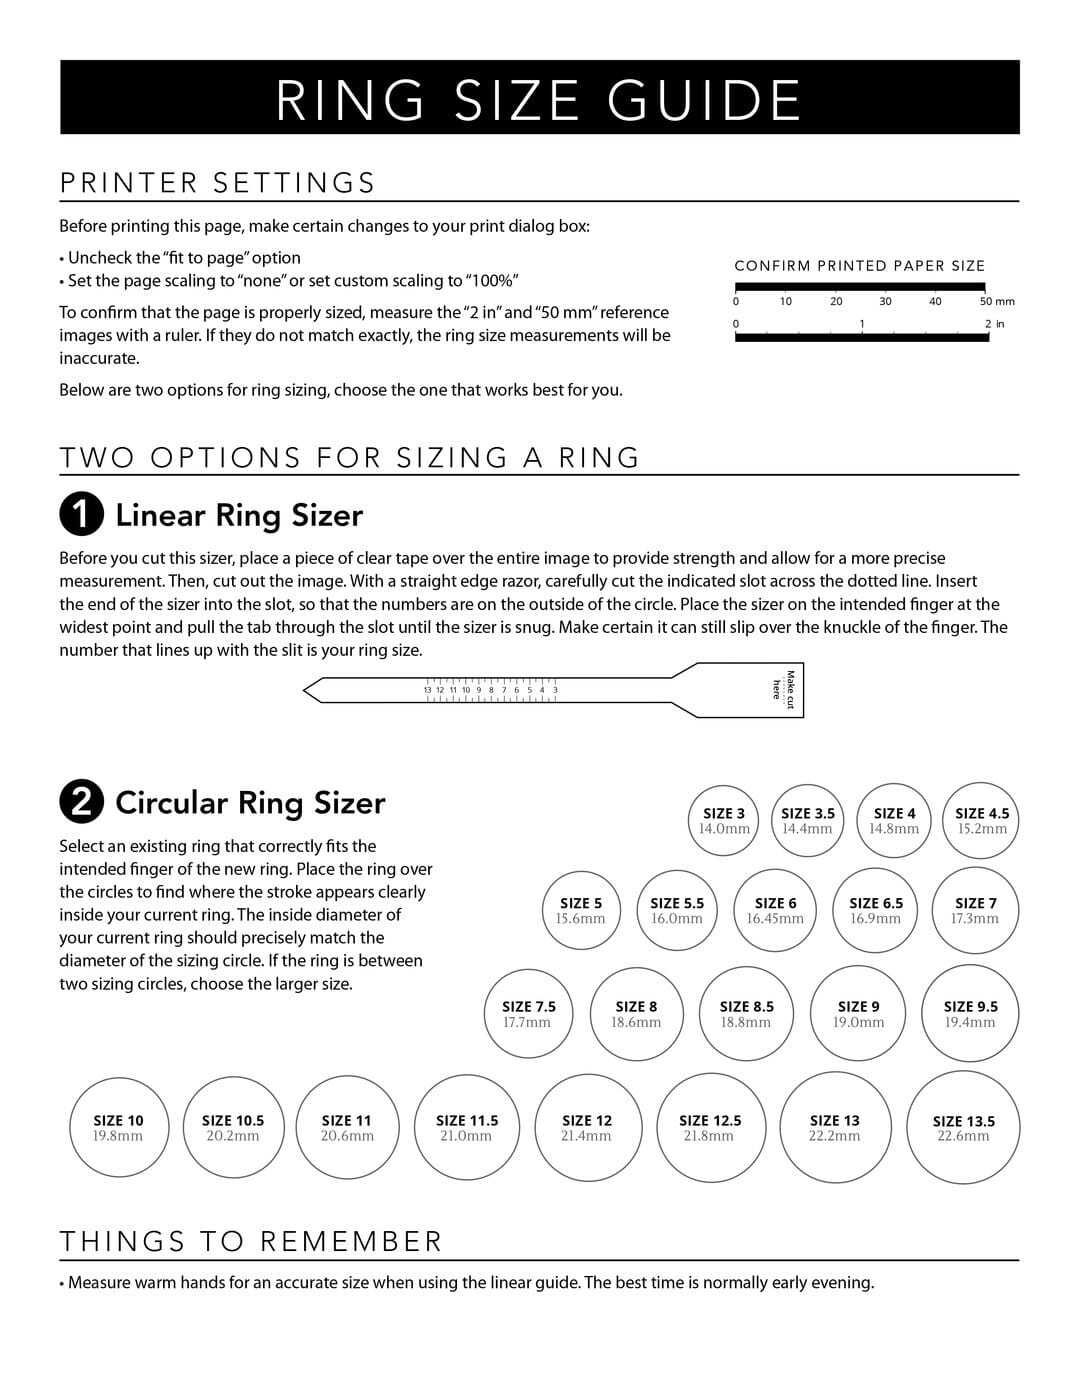 FREE PRINTABLE RING FINGER SIZE CHART